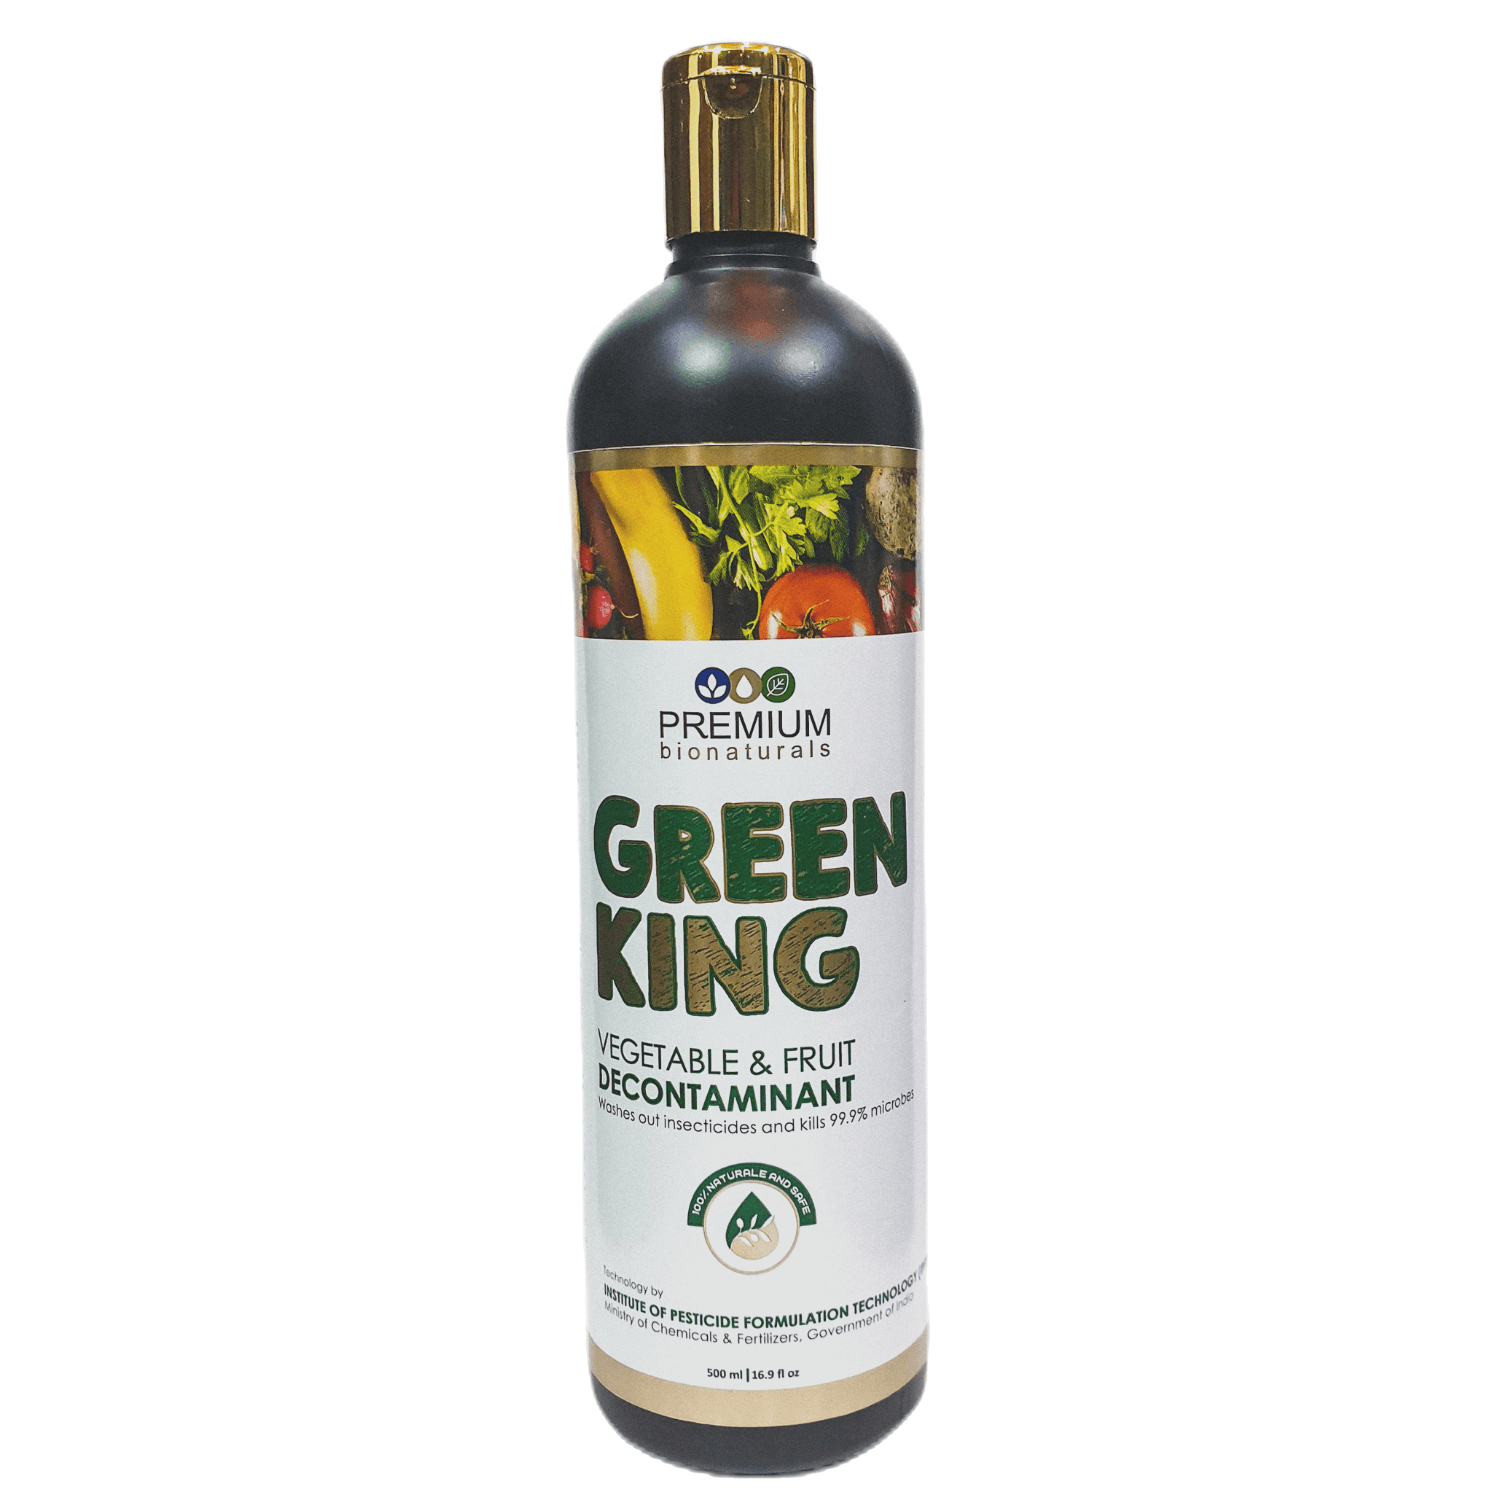 Experience the ultimate in fruit care with Green King – a 100% organic fruit disinfectant for guaranteed health and safety.